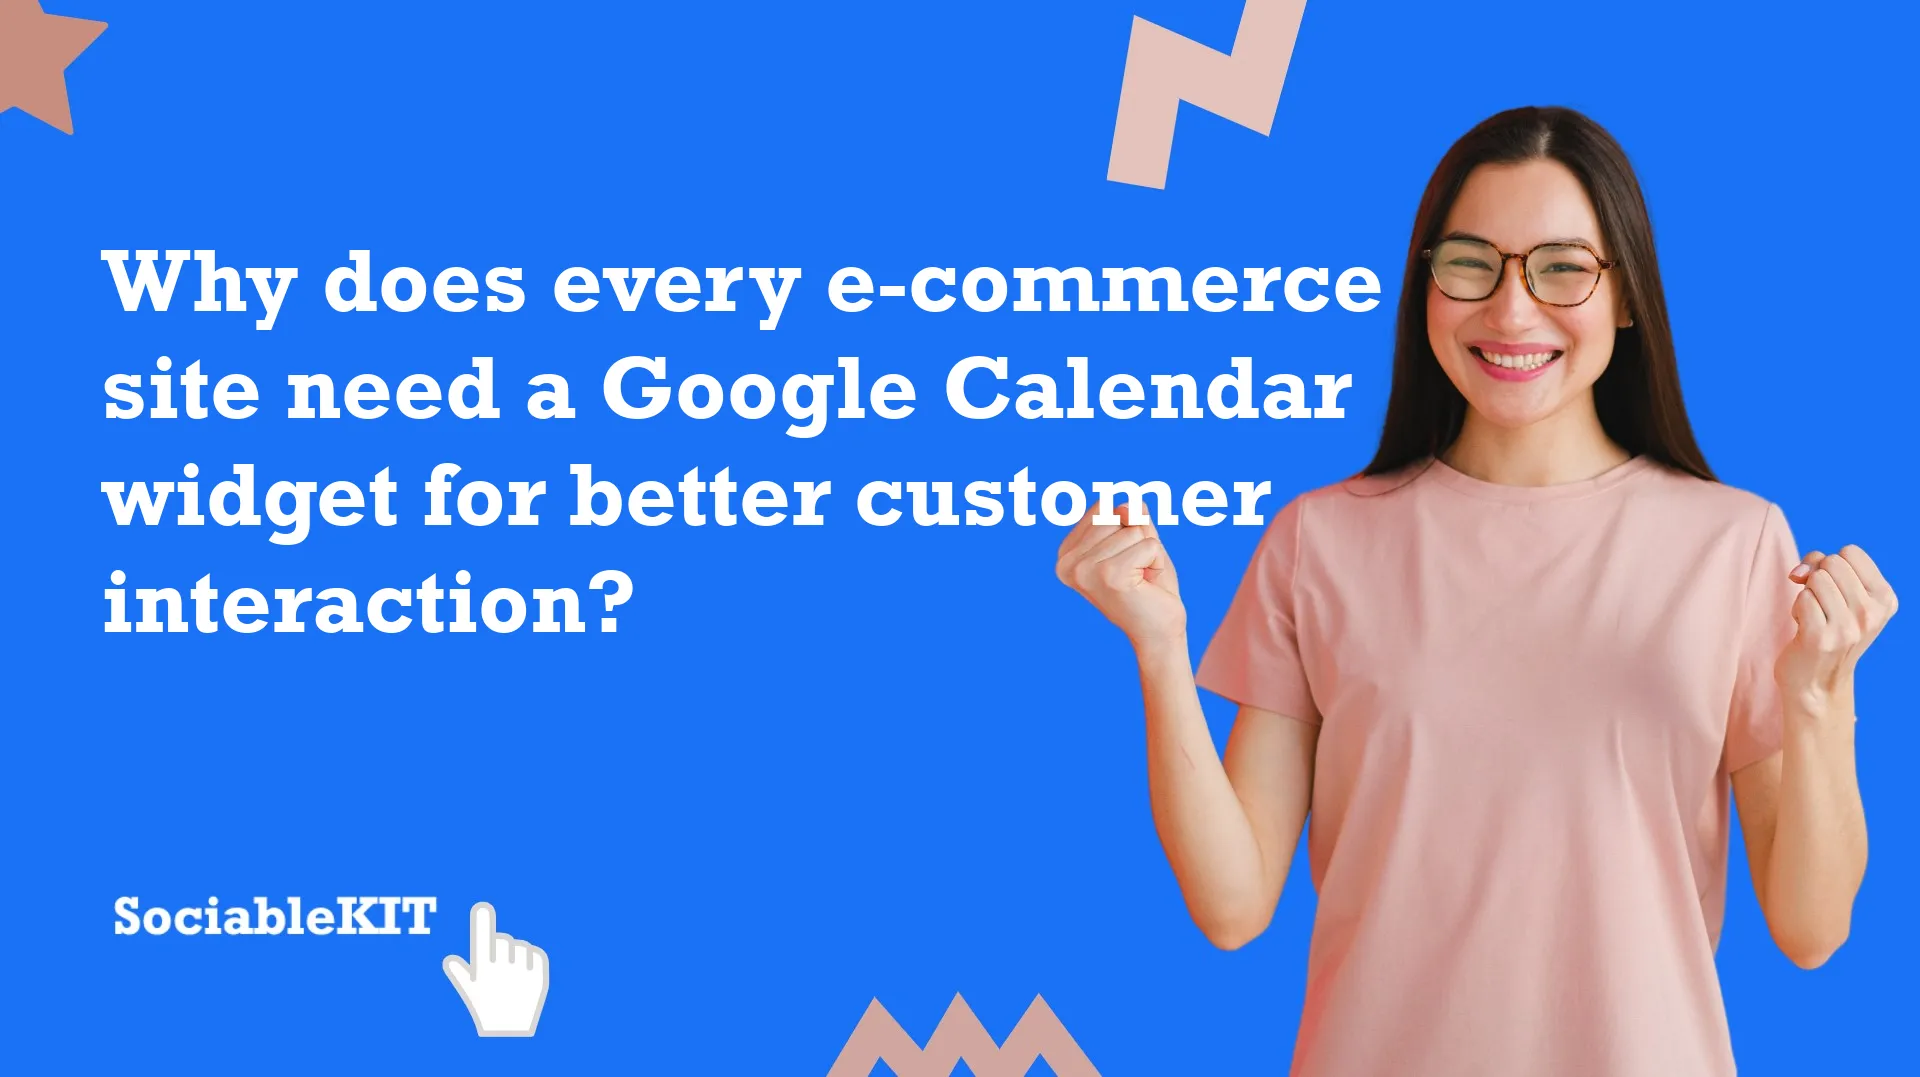 Why does every e-commerce site need a Google Calendar widget for better customer interaction?